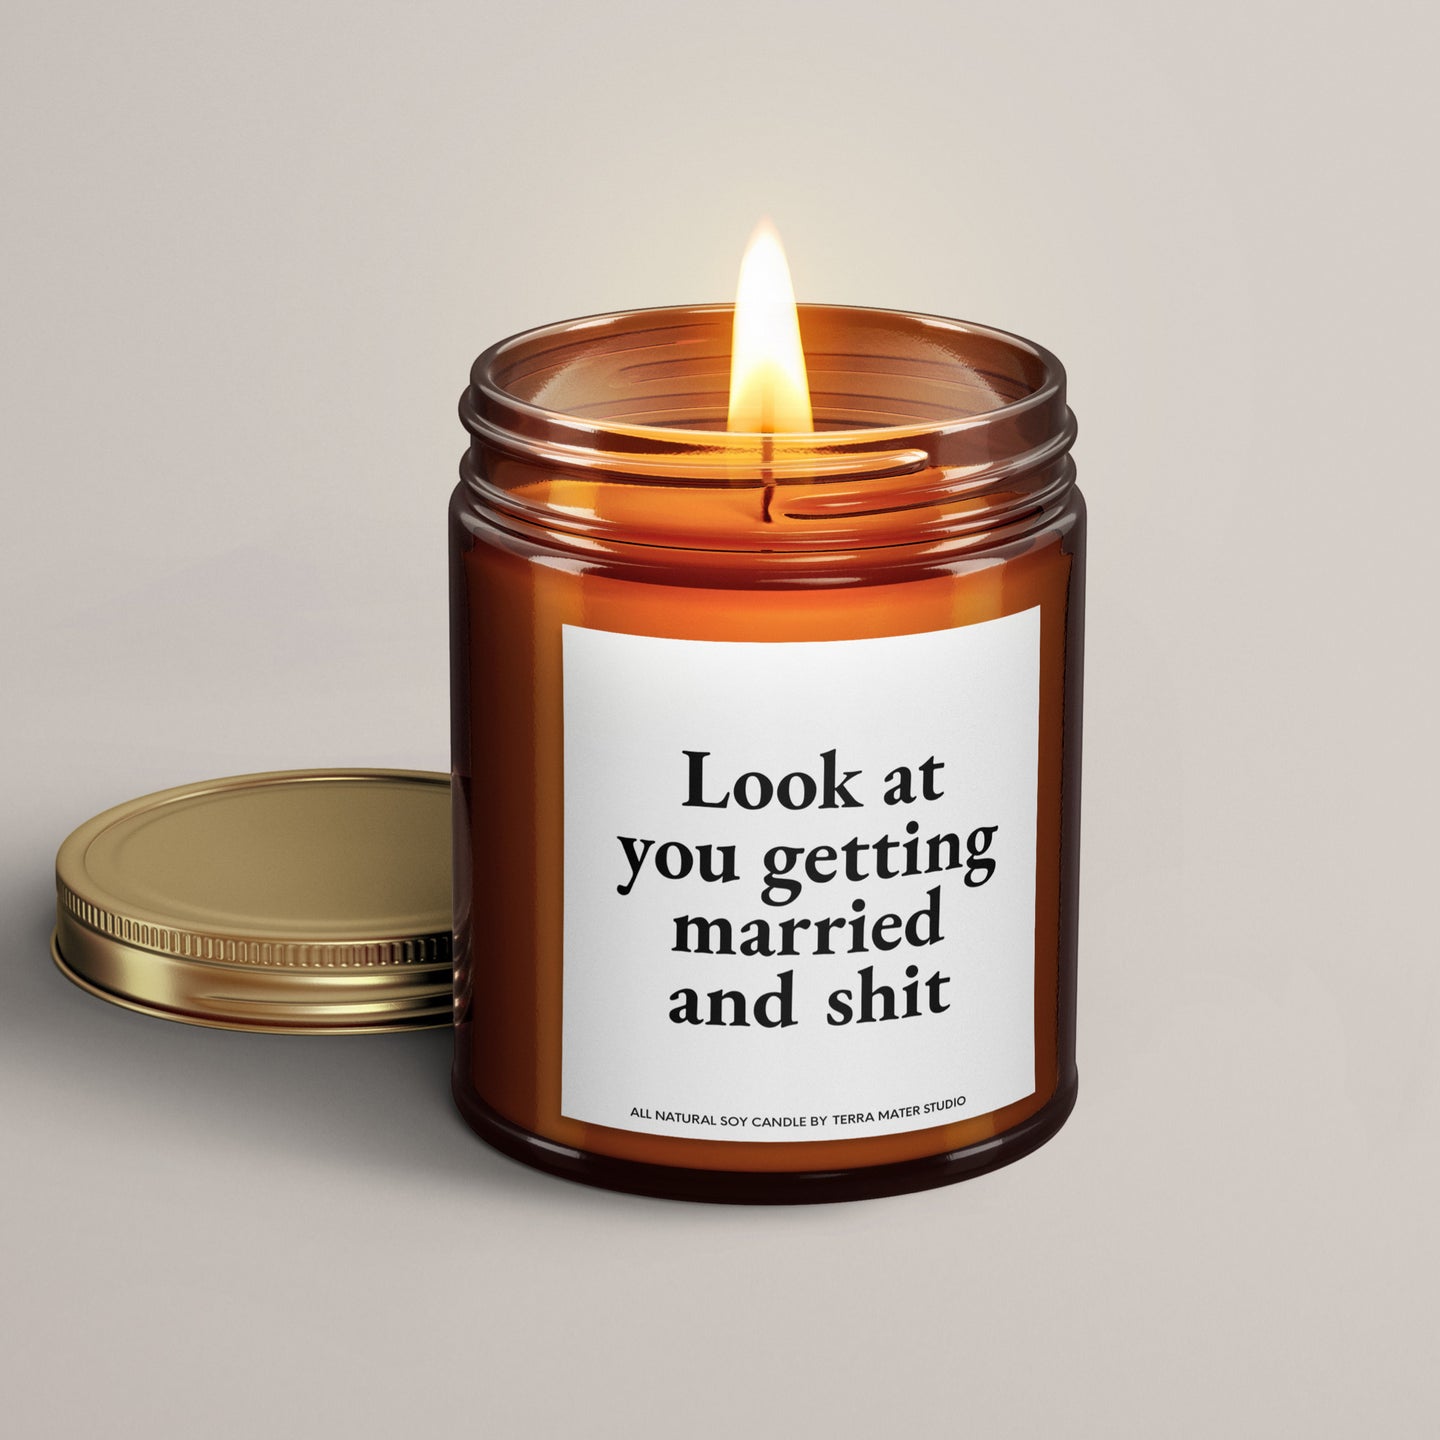 Look At You Getting Married And Sh*t Soy Wax Candle | Engagement Gift